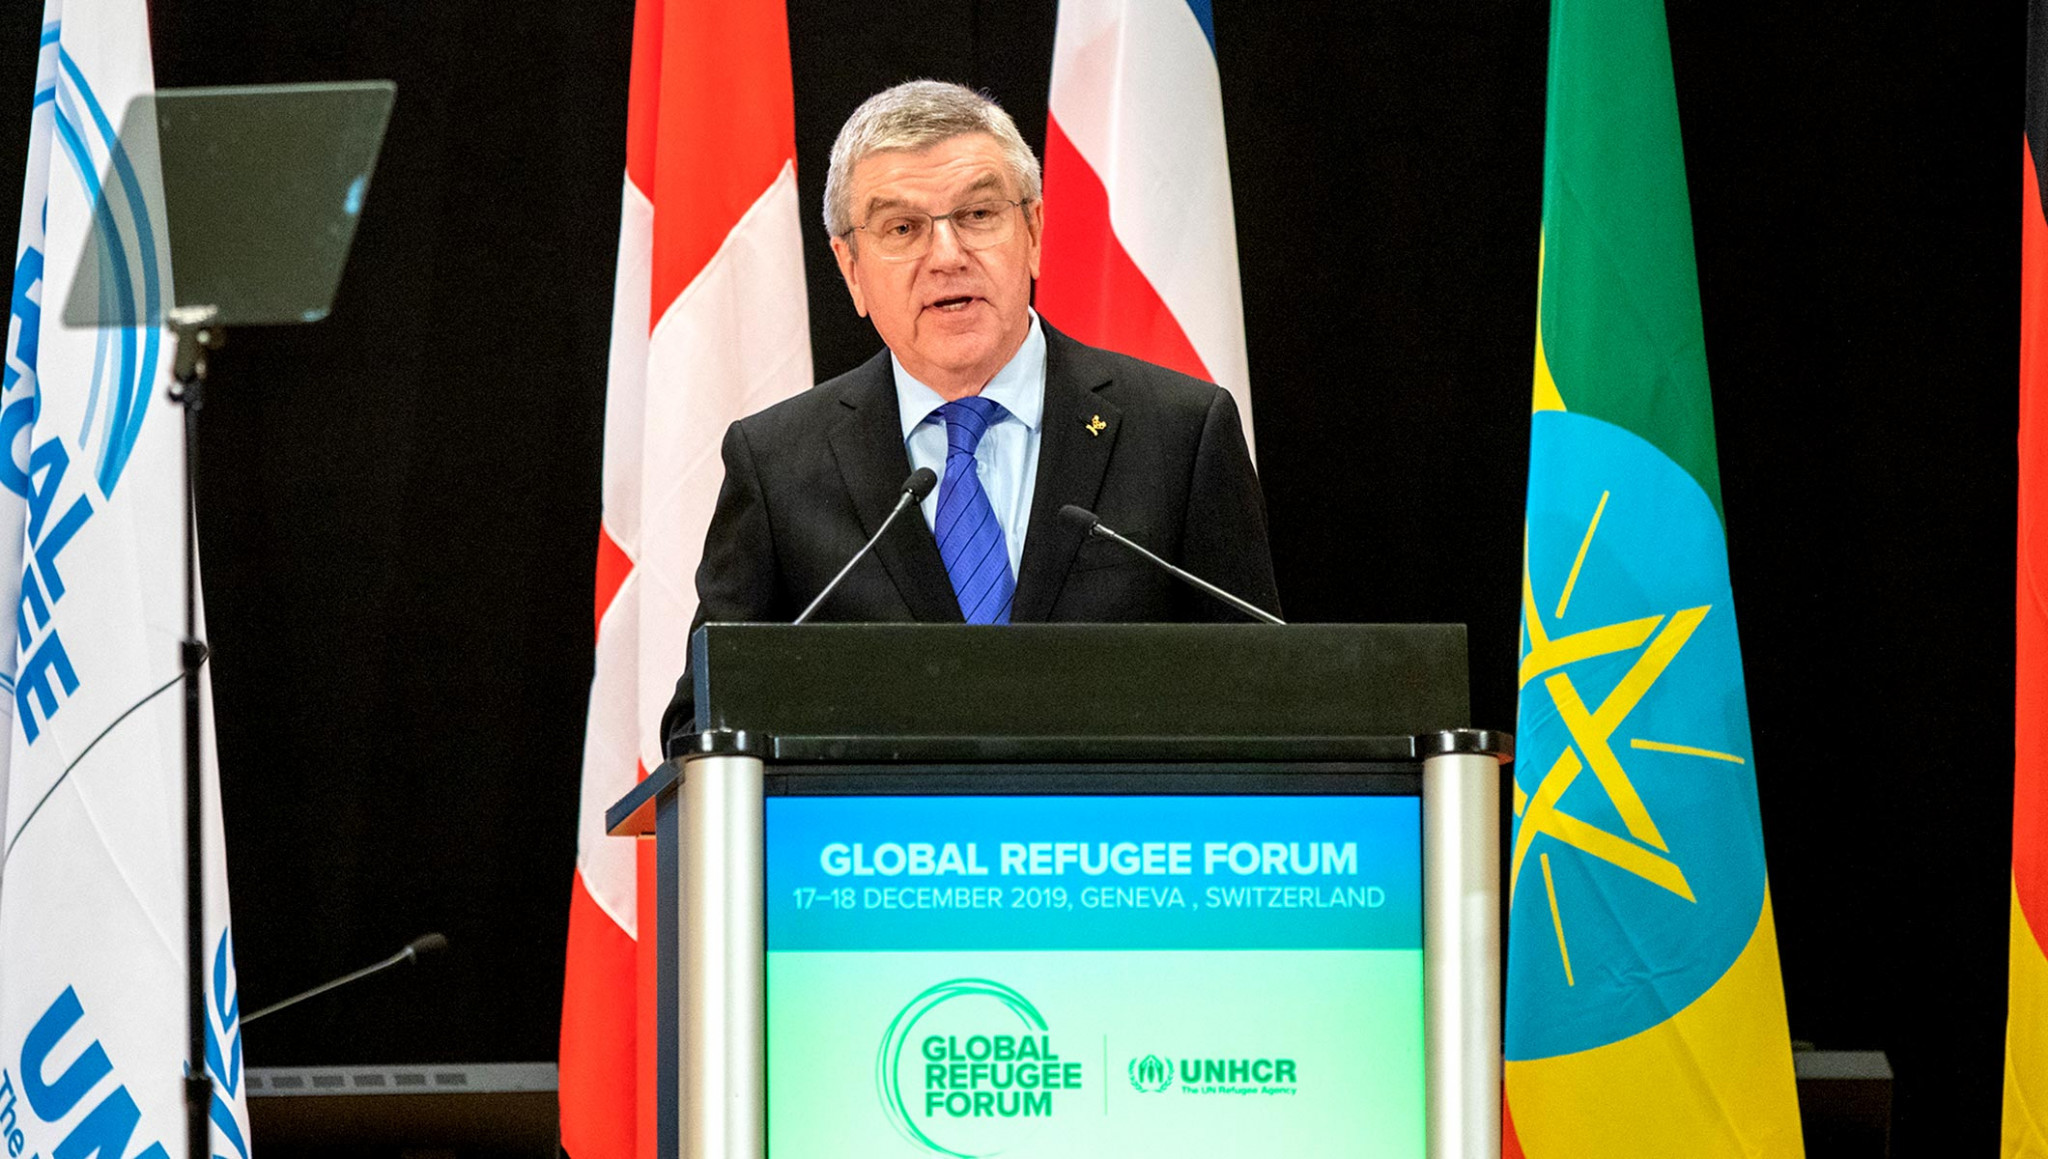 Thomas Bach spoke at the Global Refugee Forum ©UNHCR